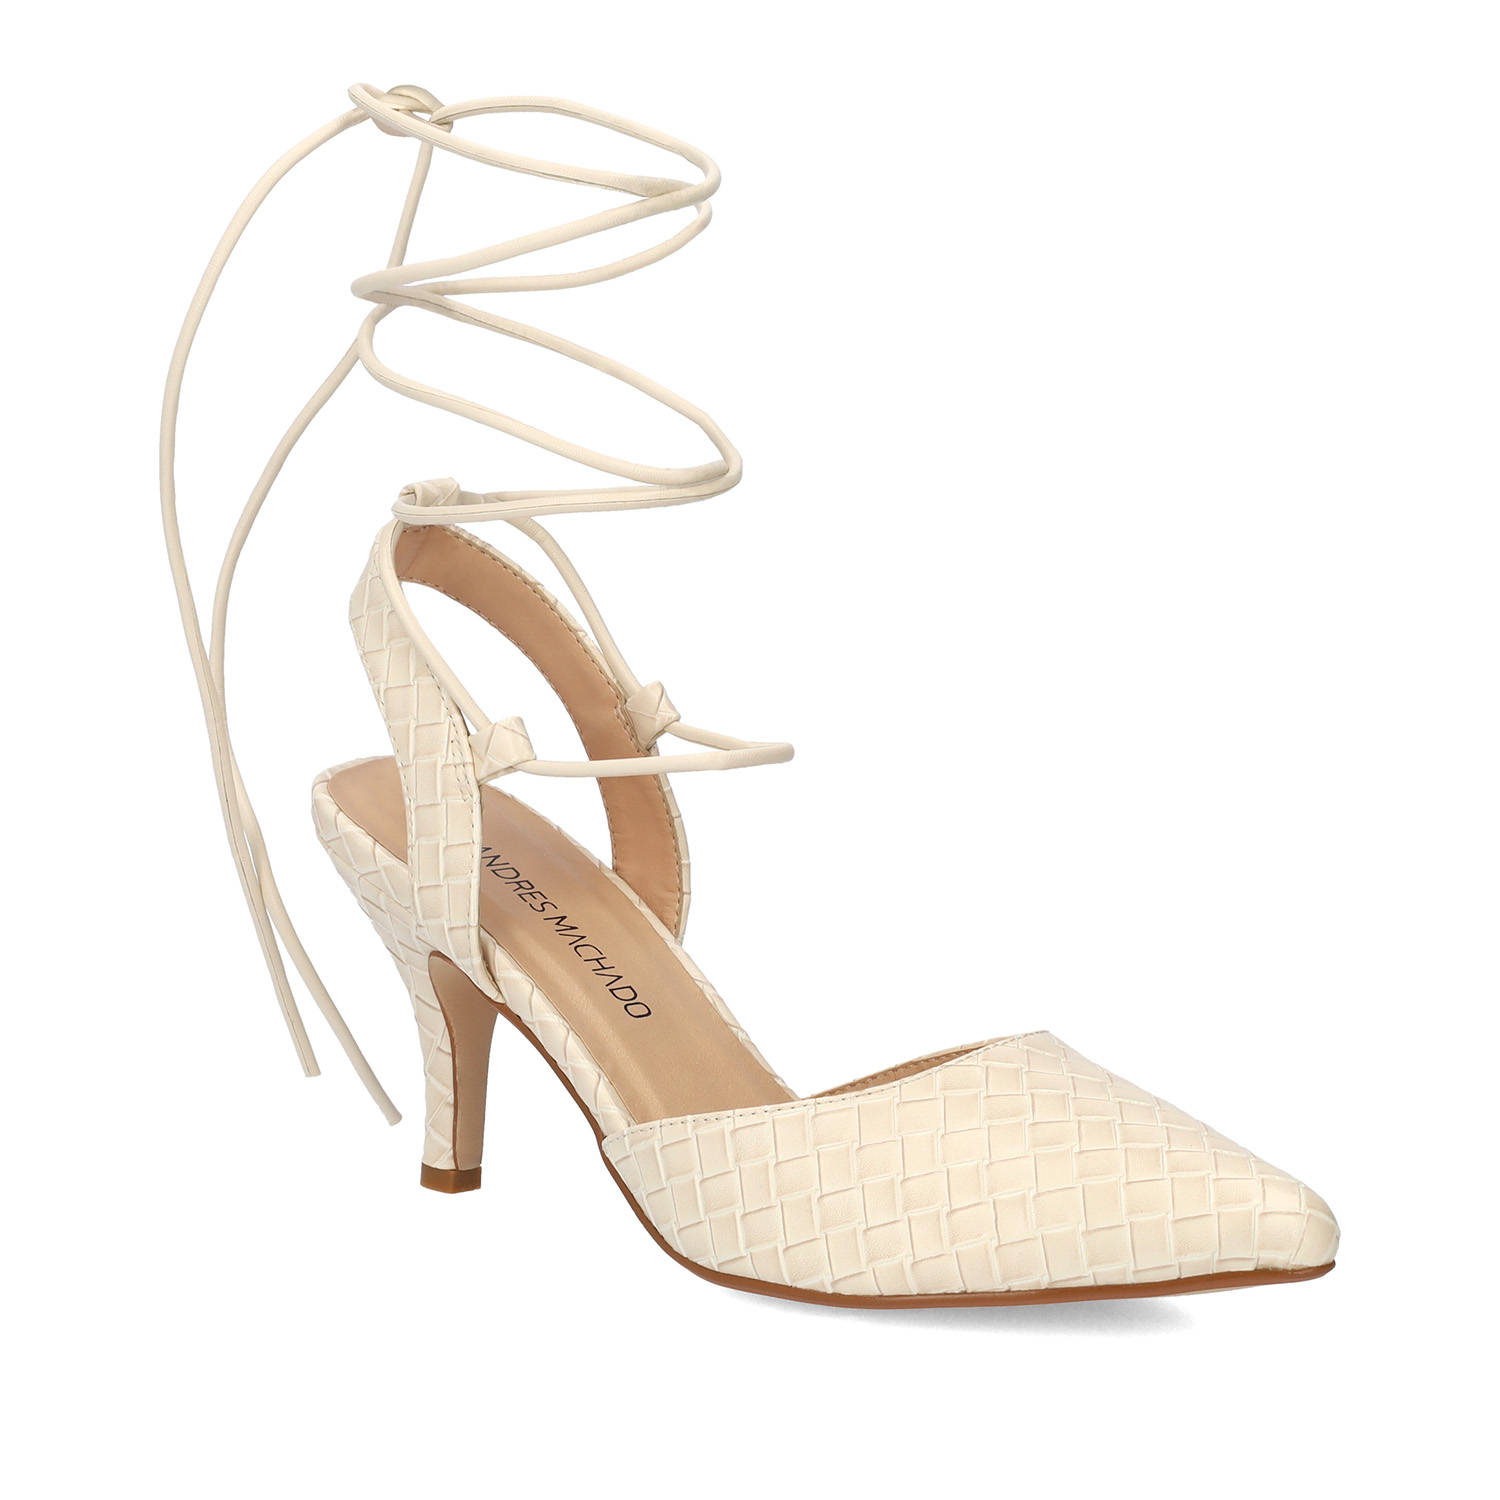 Woven white faux leather heeled shoes 